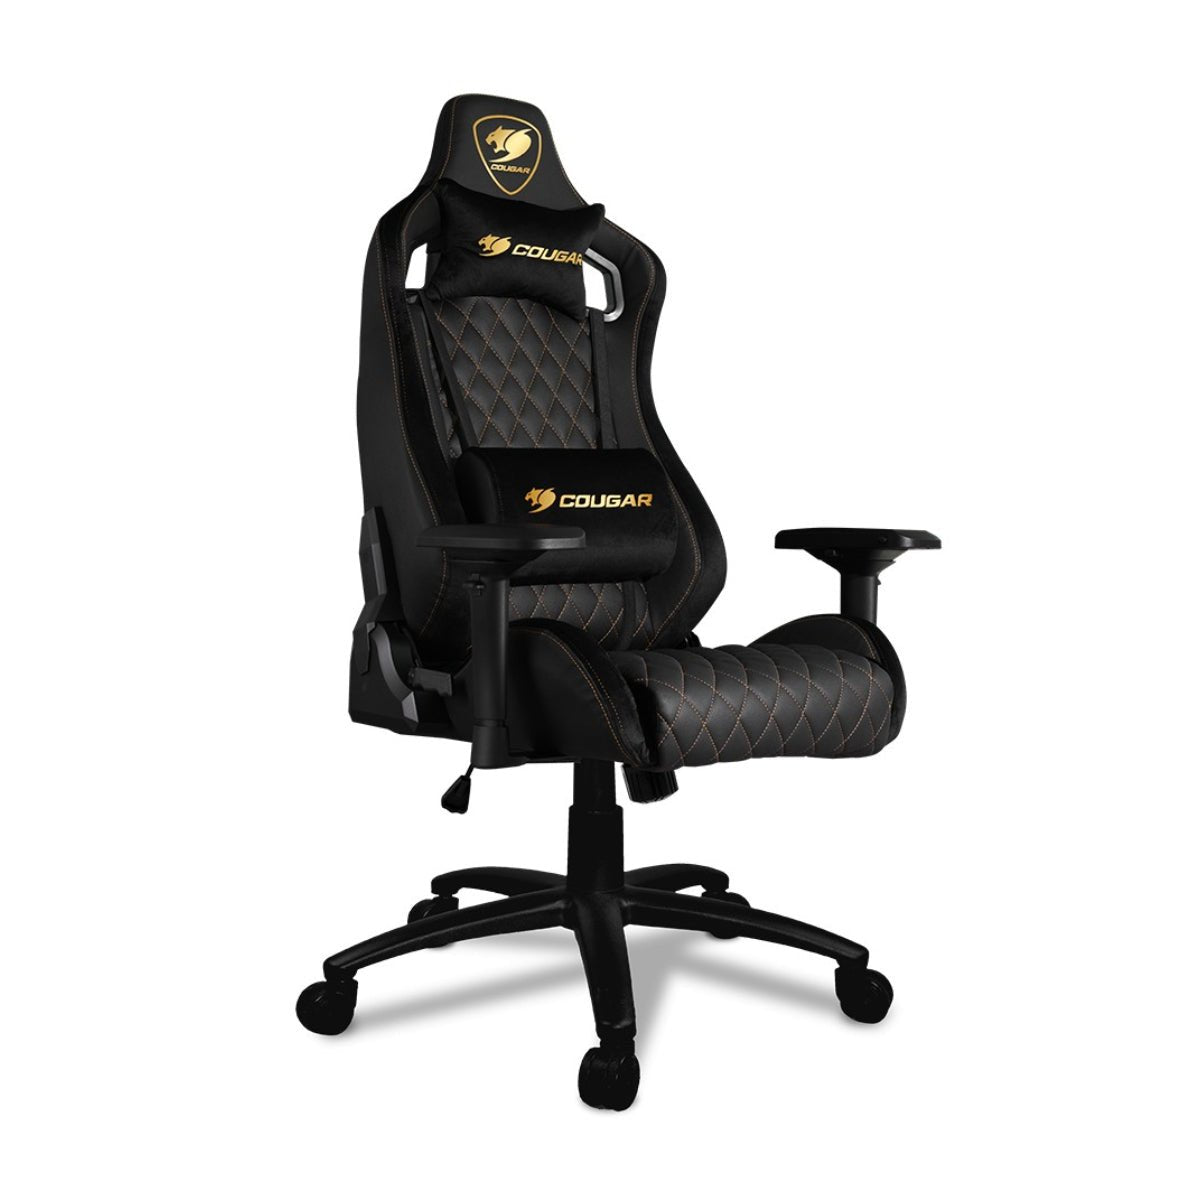 Cougar Armor One Royal Style Gaming Chair - Black - Store 974 | ستور ٩٧٤